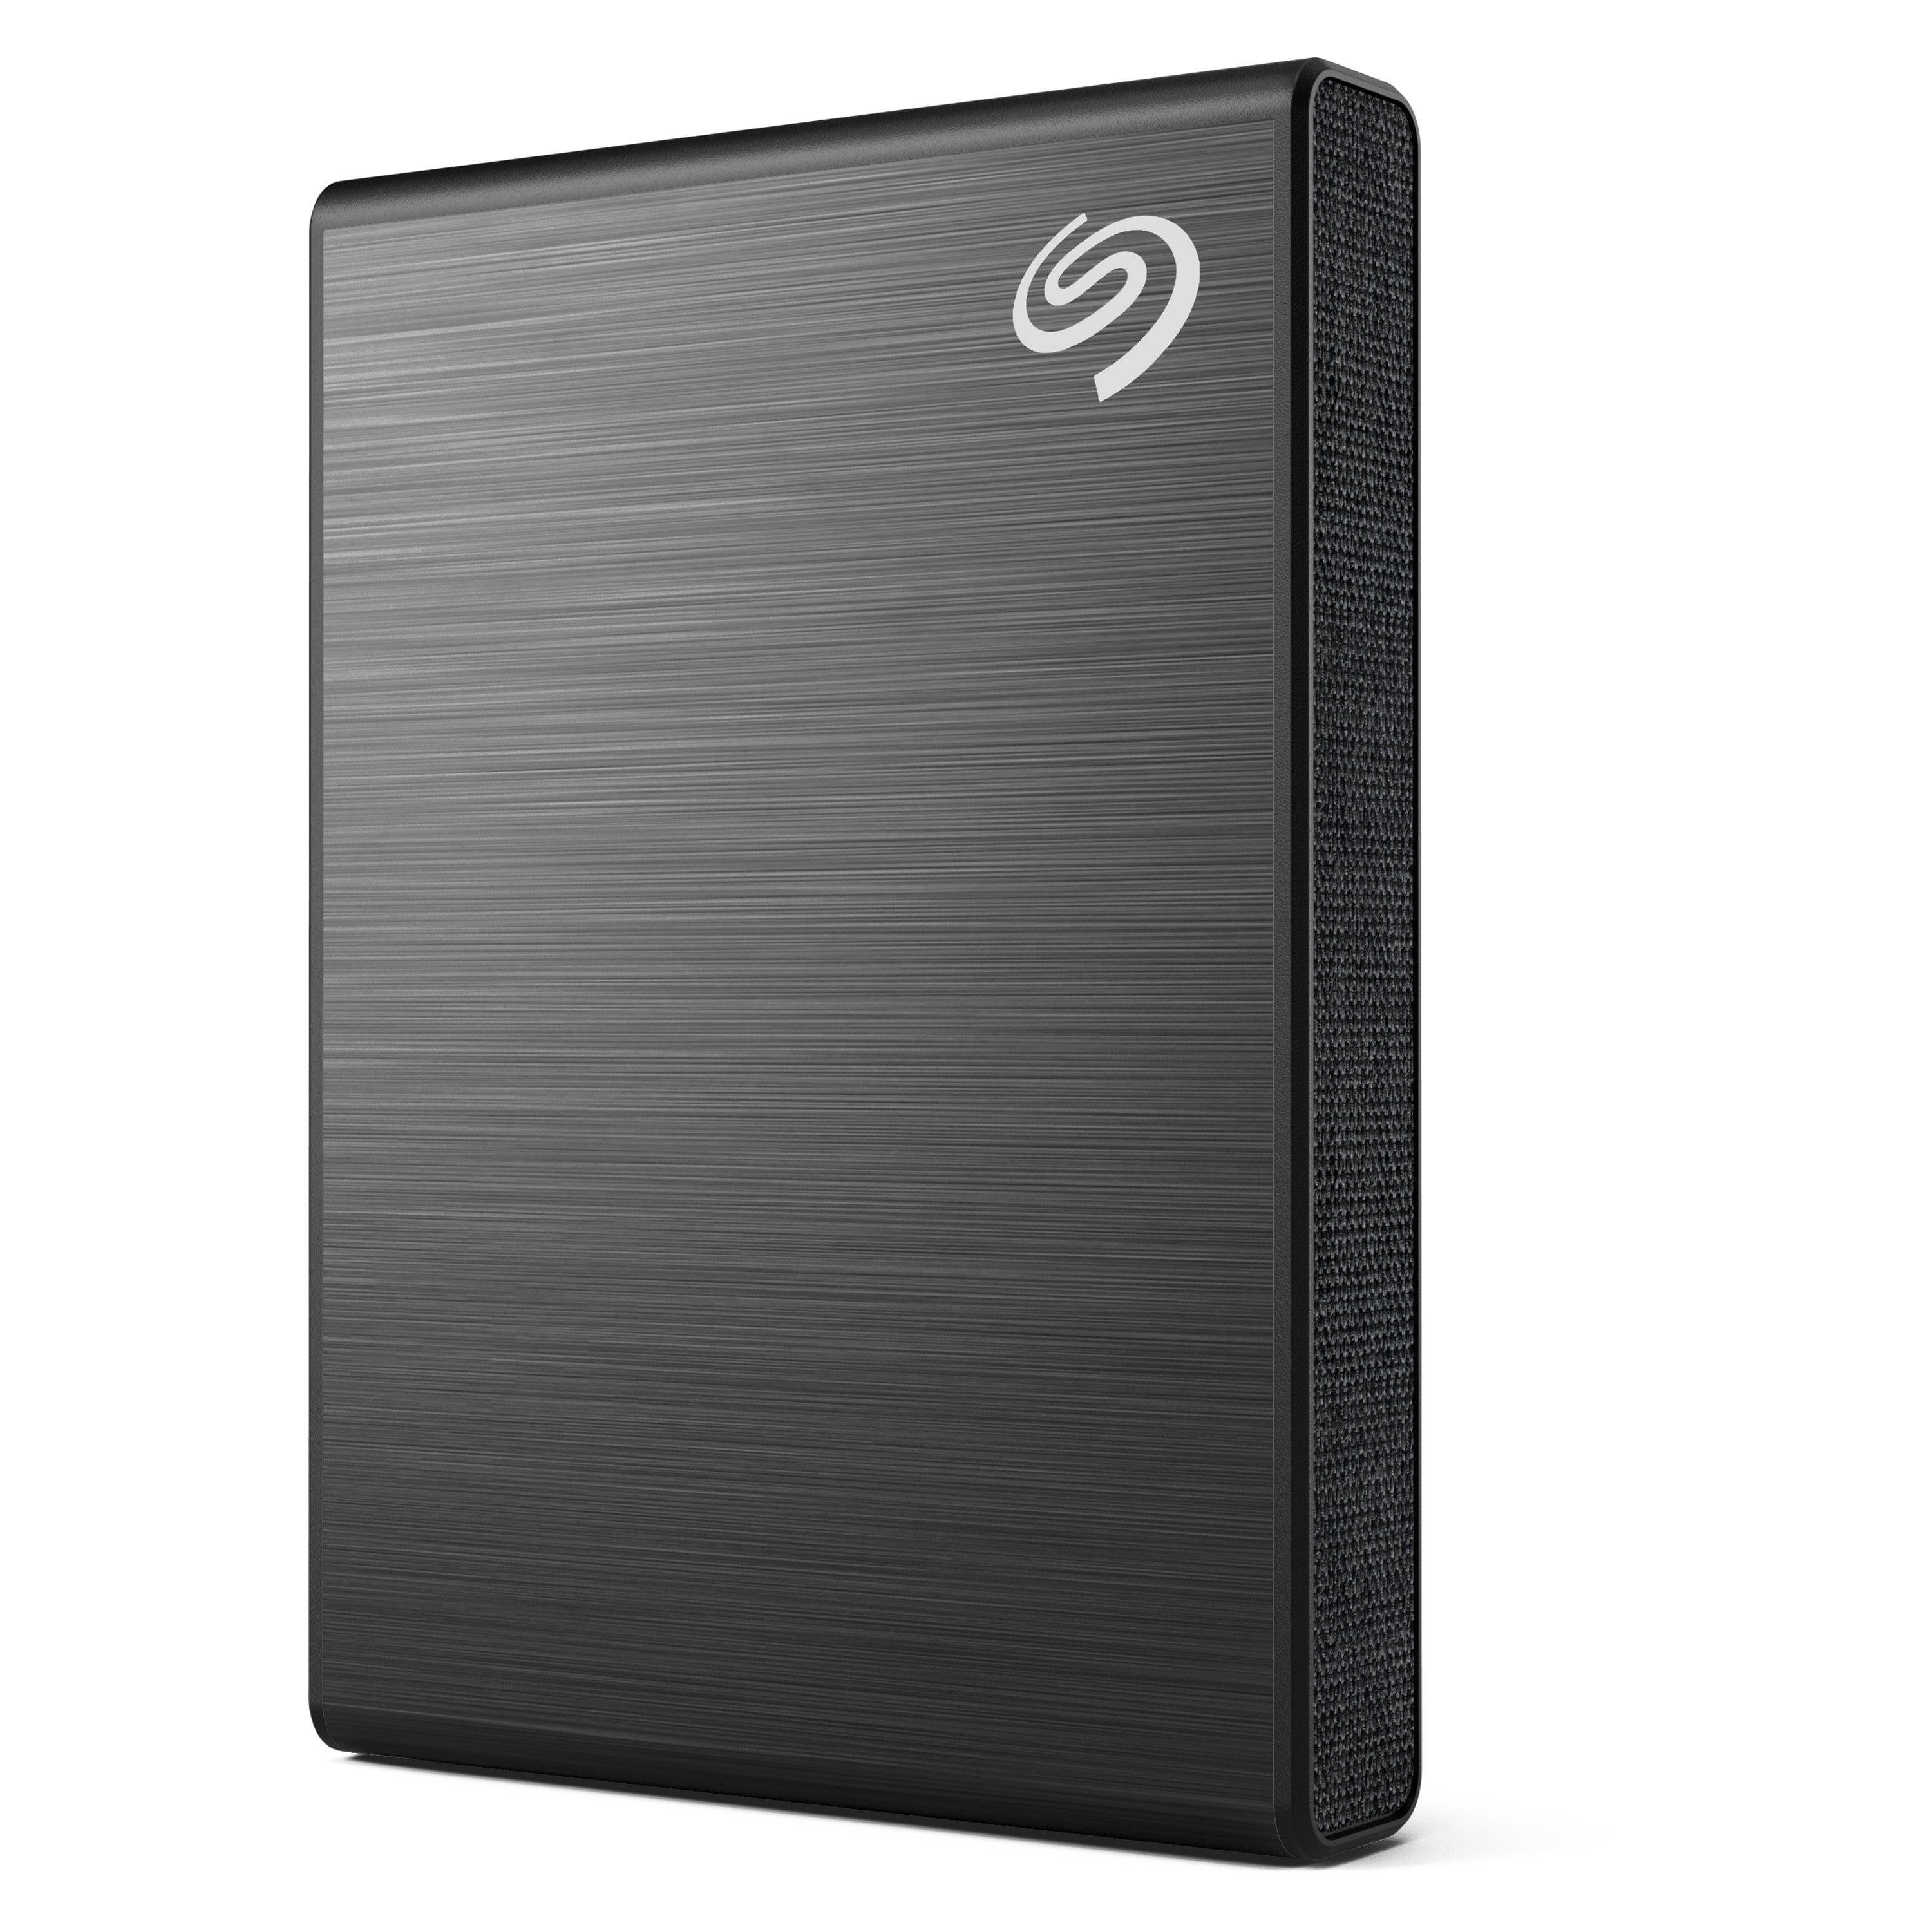 2TB Golden External Hard Drive,Slim External Hard Drive1TB 2TB Portable Storage Drive Compatible with PC Laptop and Mac